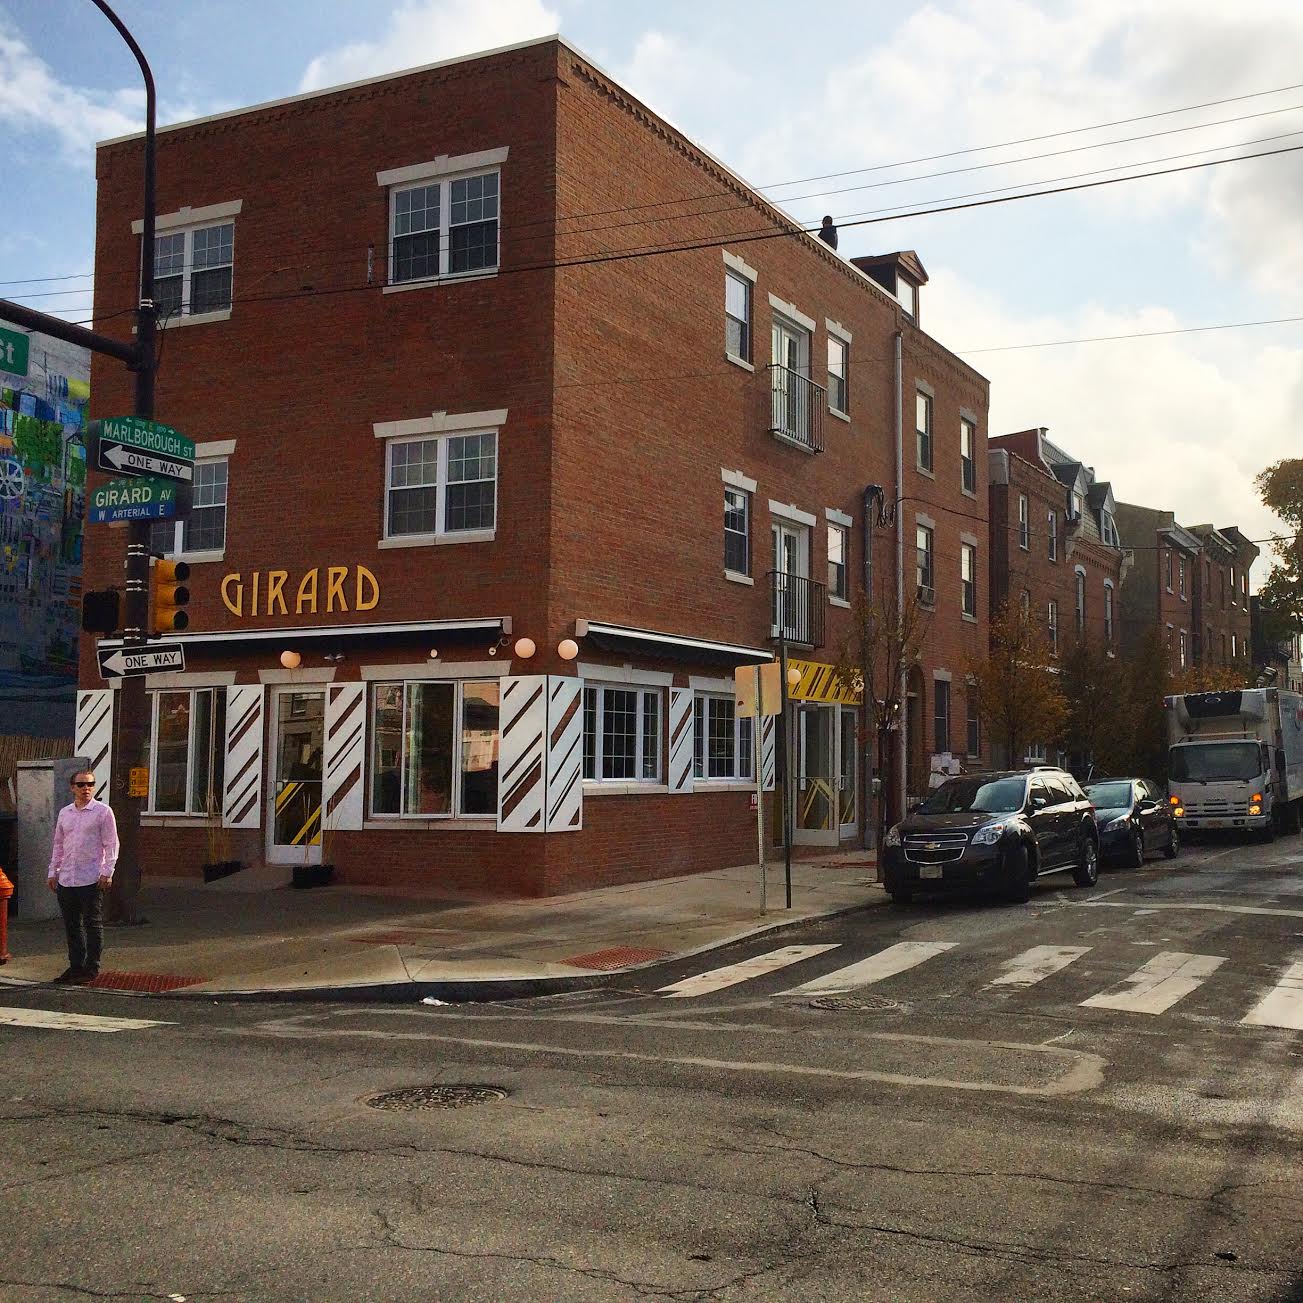 Big changes are coming to Girard on Girard